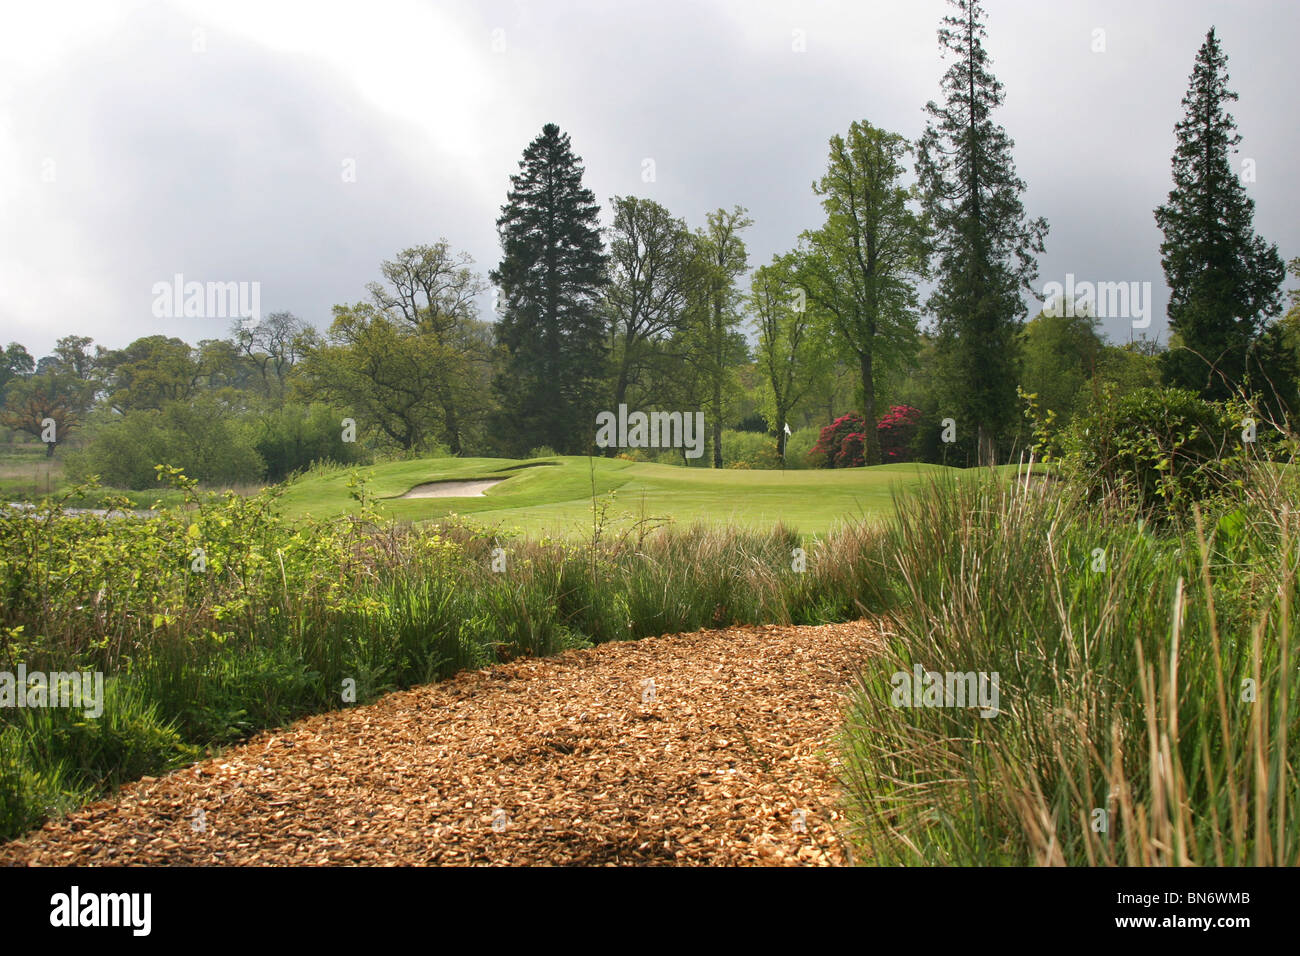 Loch Lomond Golf Course, Glasgow, Scotland. Hole 17 foliage with trees and bushes in the background. Stock Photo